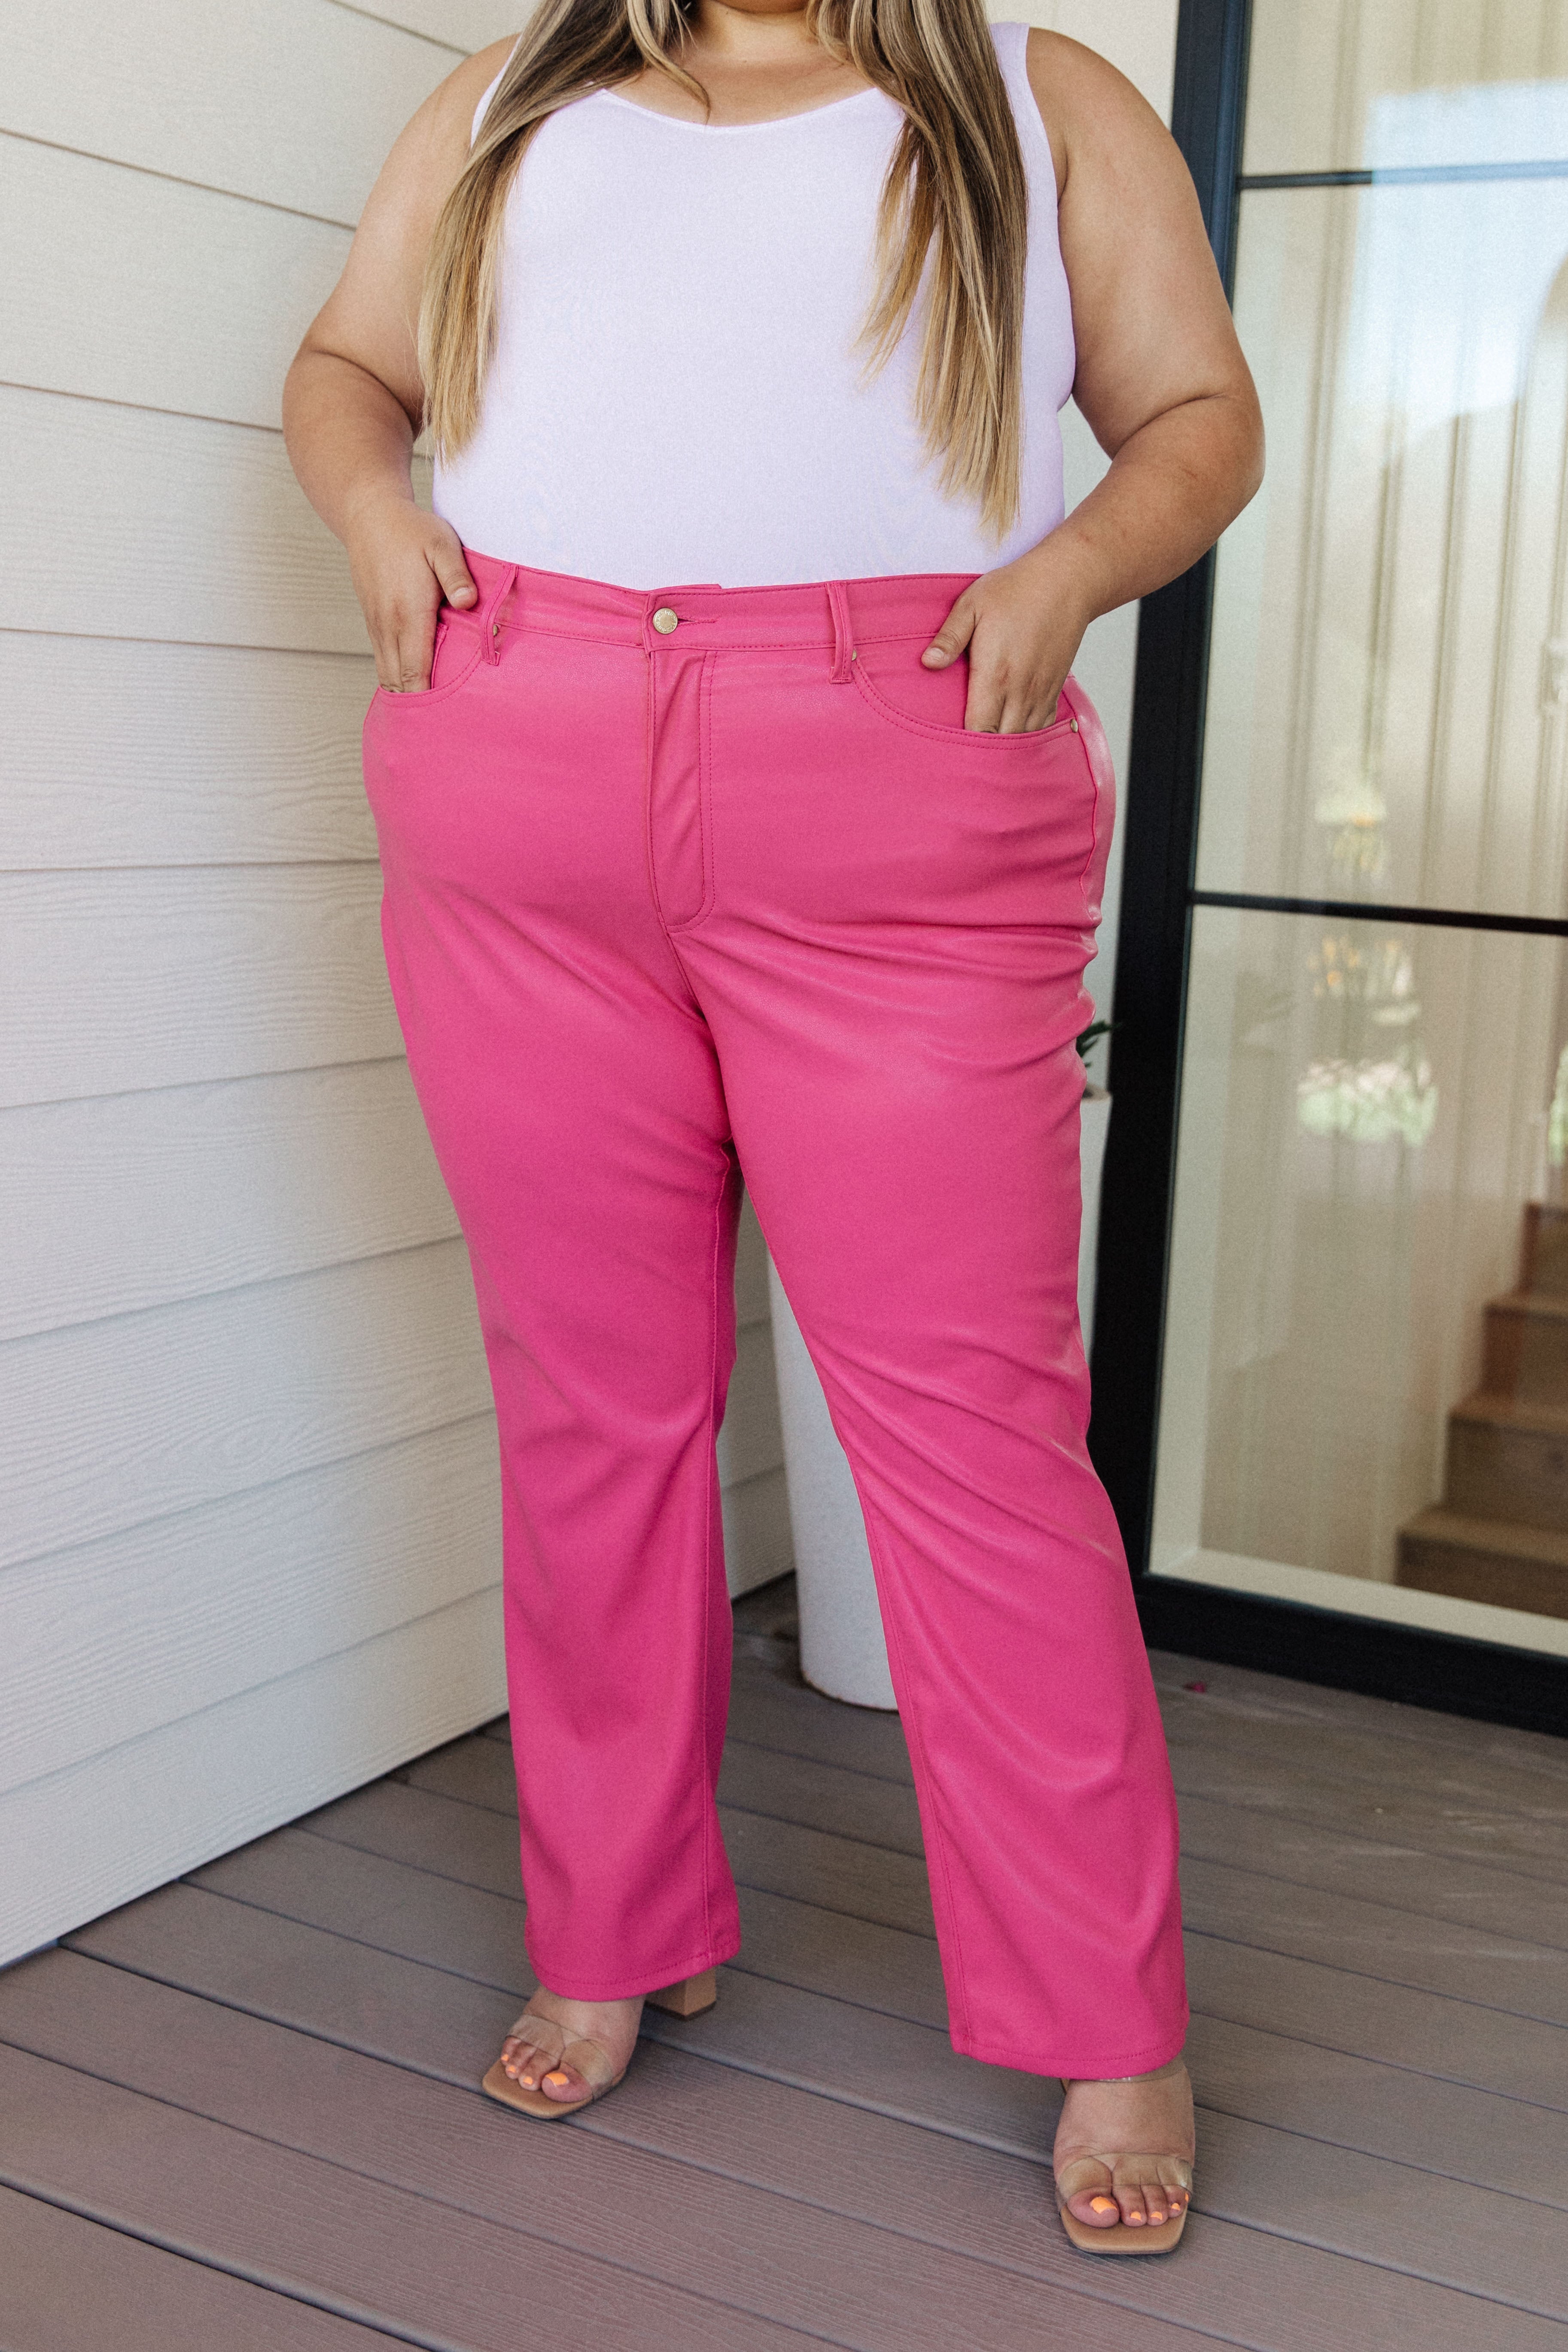 Judy Blue Tanya Tummy Control Faux Leather Pants in Hot Pink